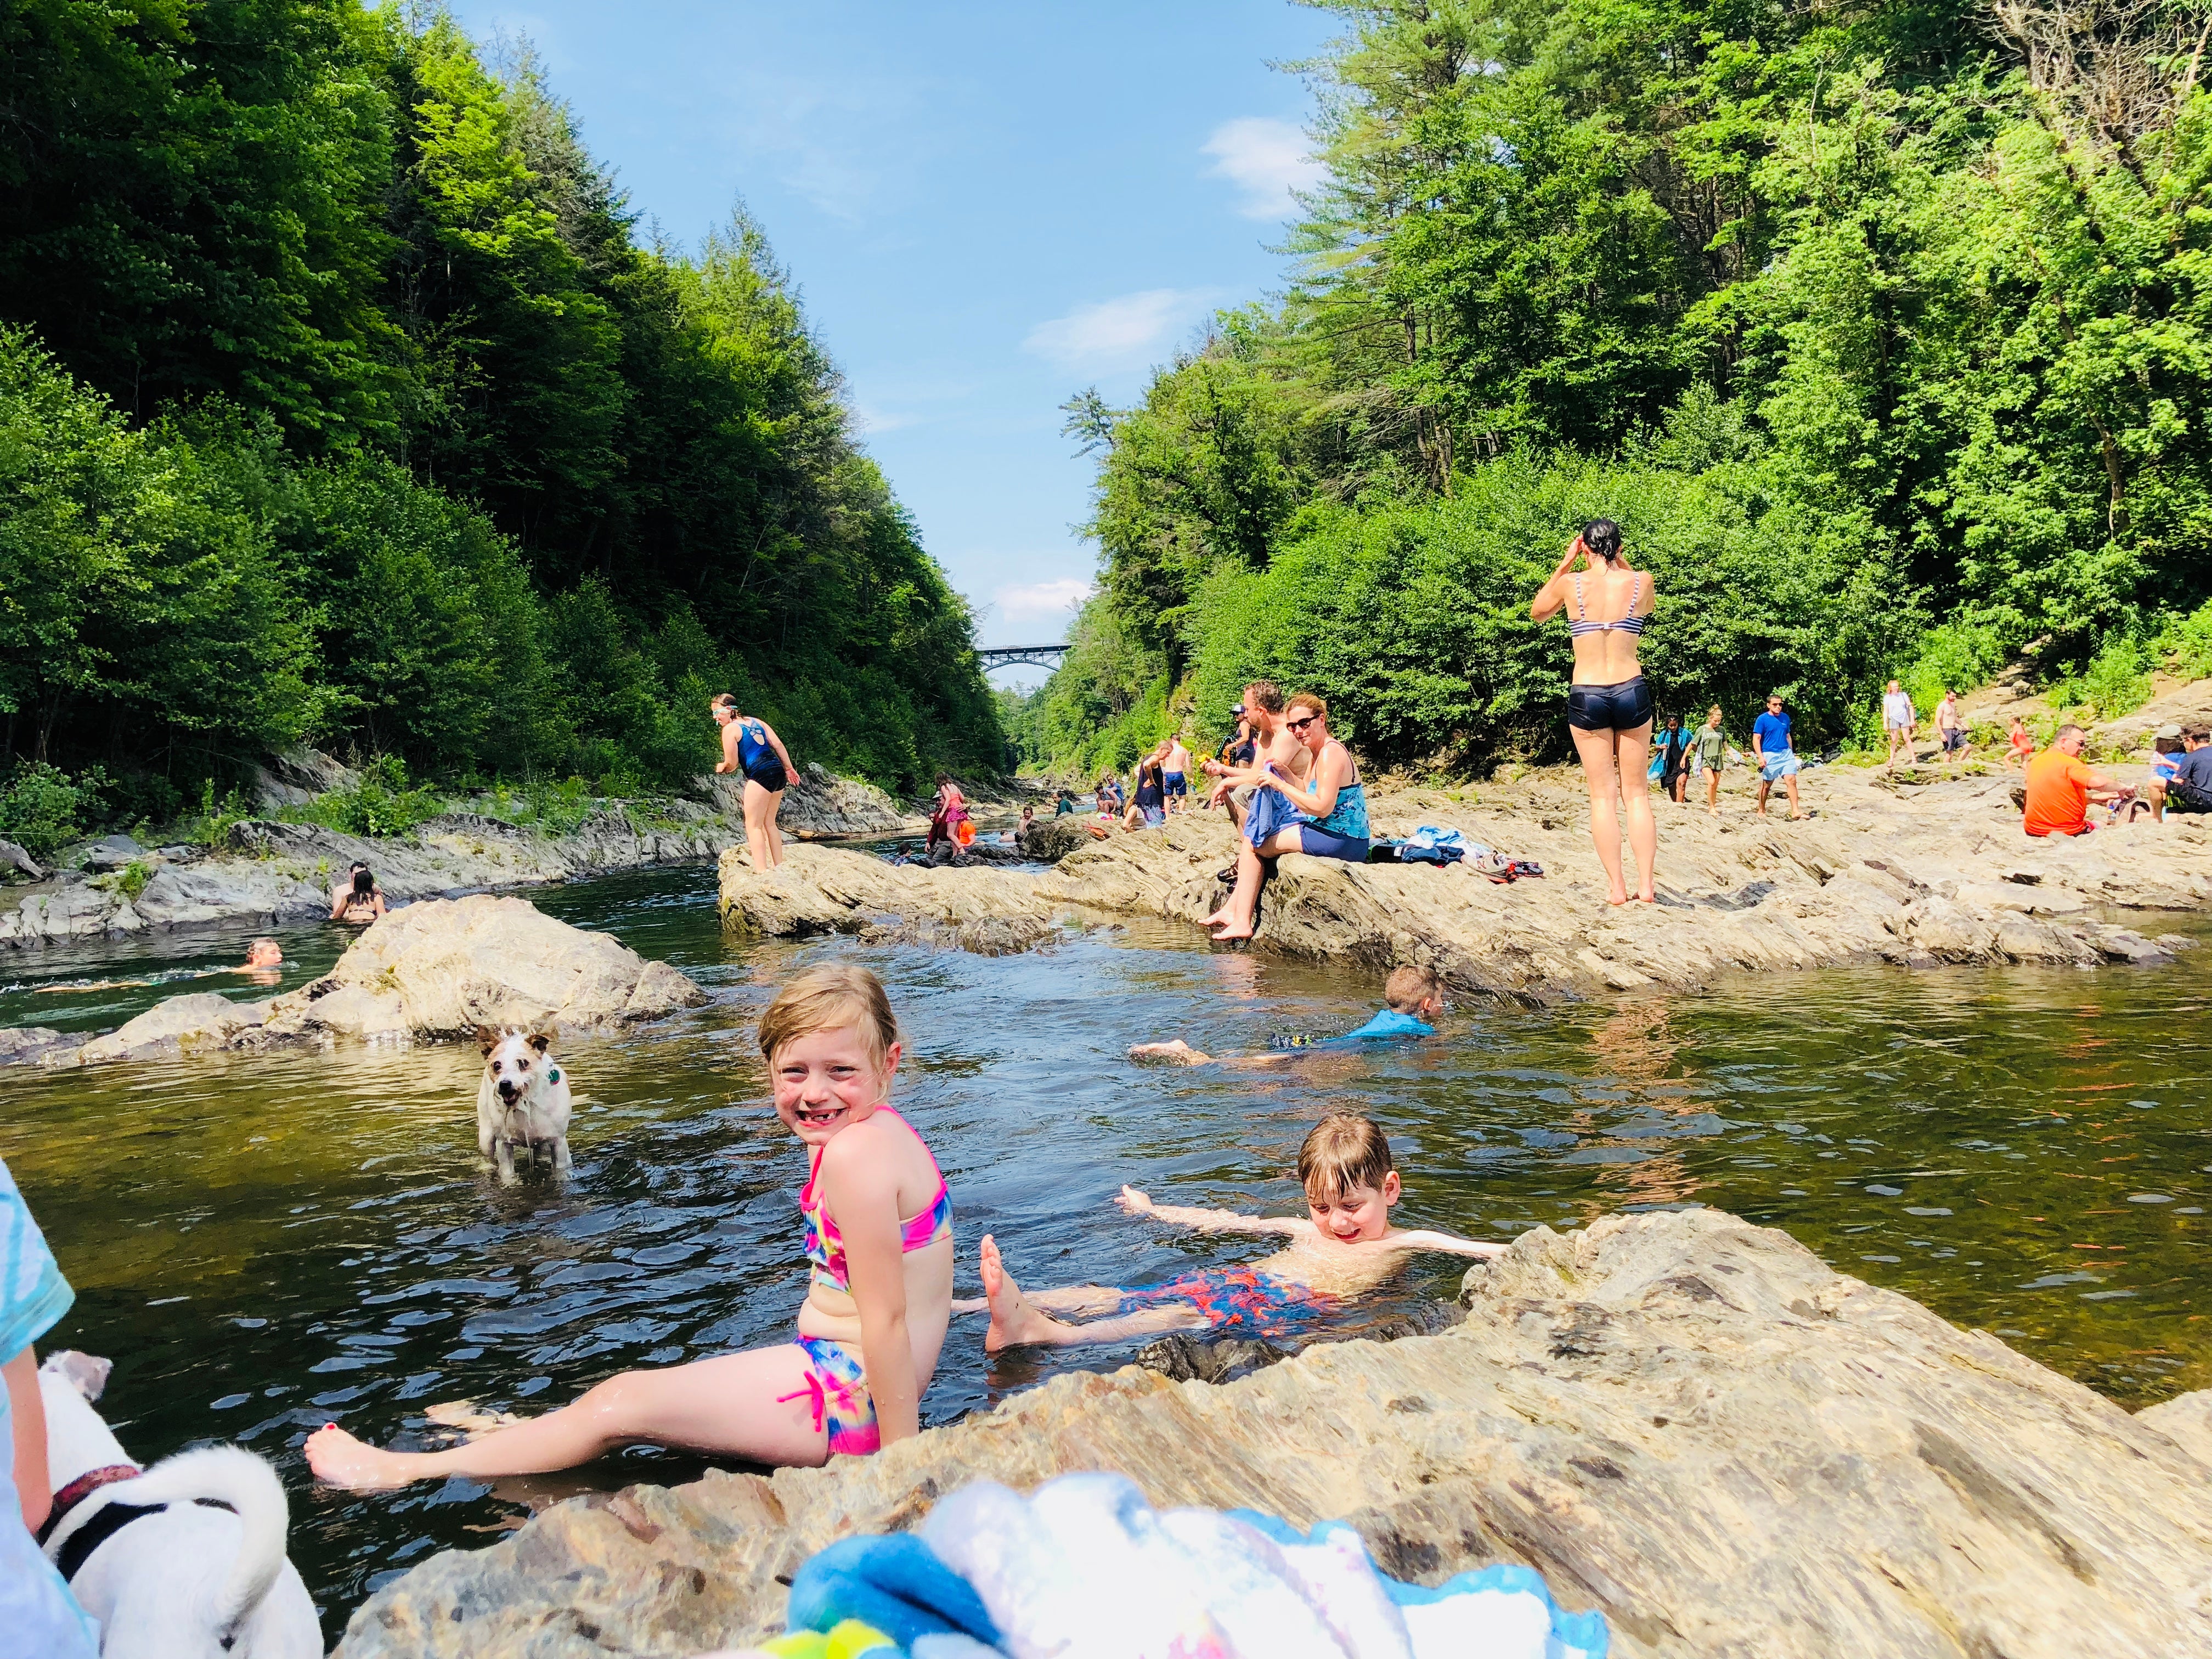 Swimming in the gorge